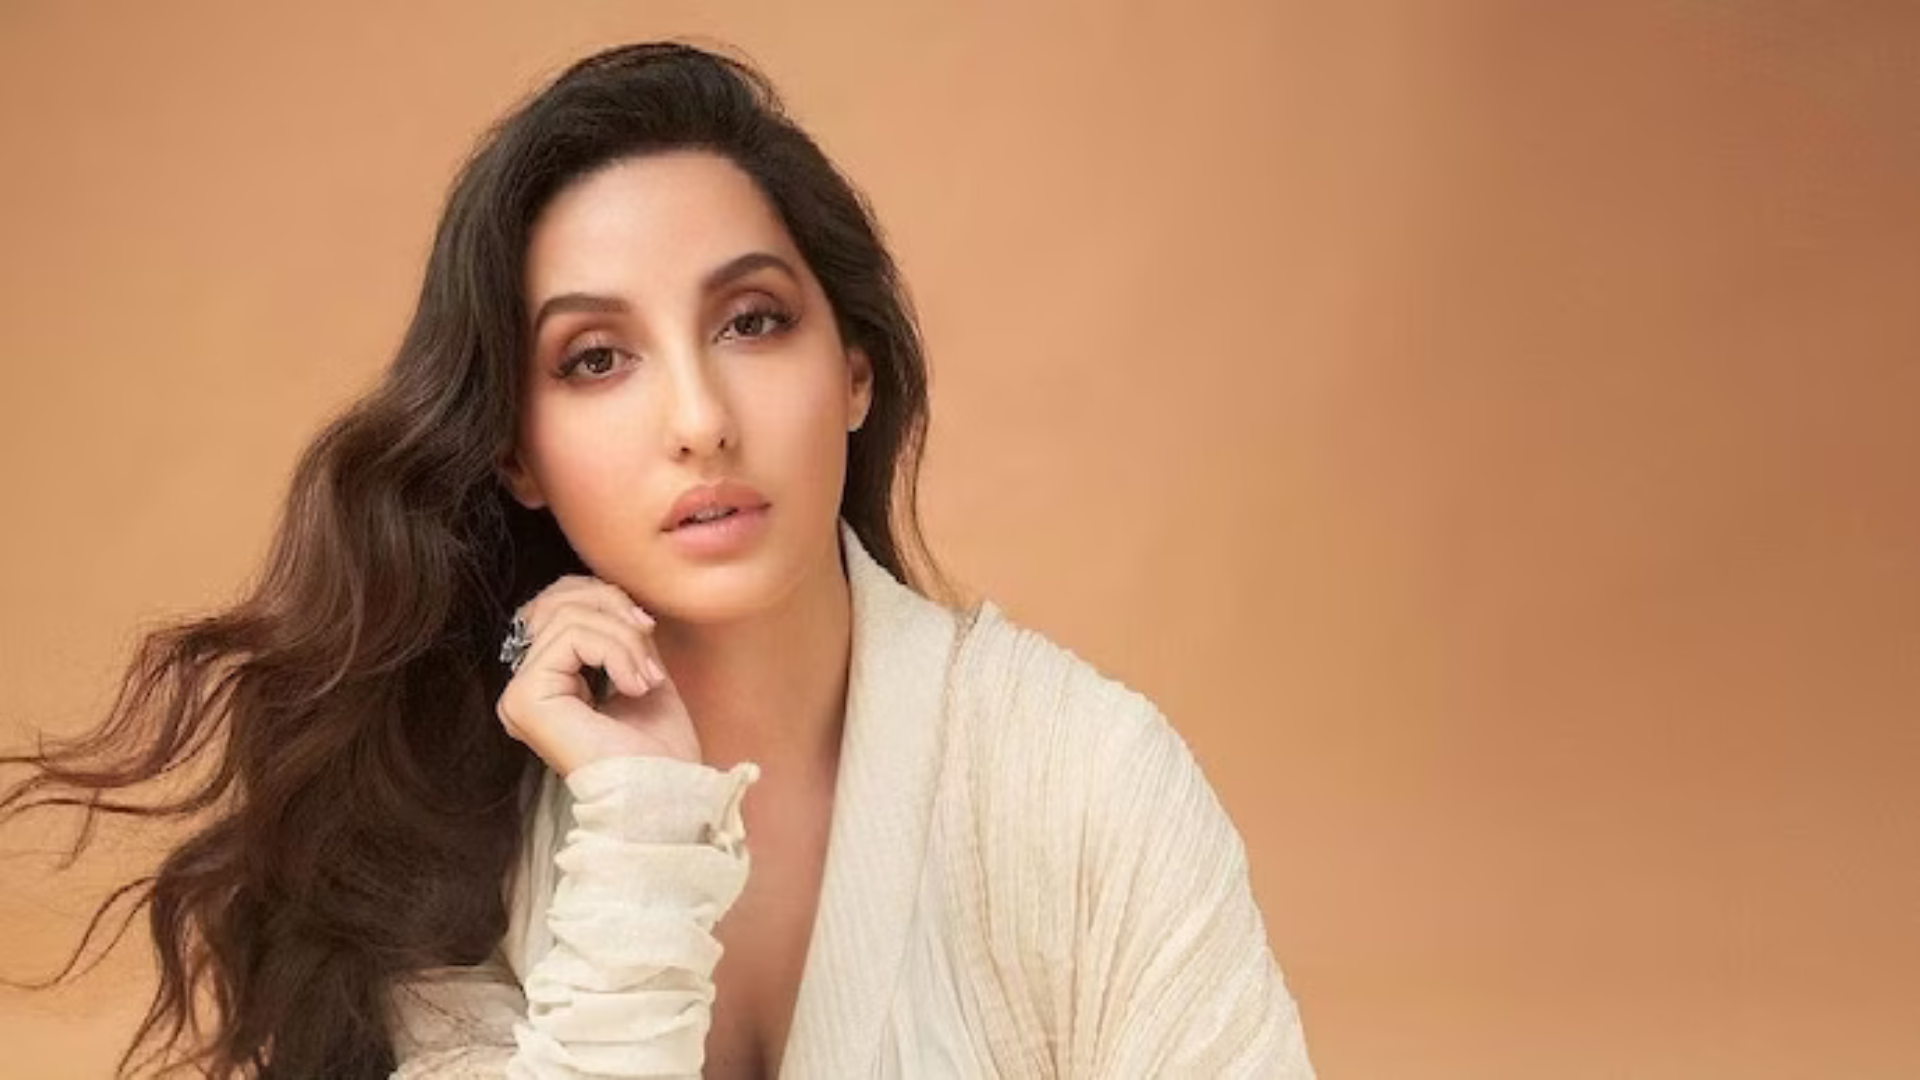 Nora Fatehi revealed being bullied by male celebrities and dodging predators: “Nobody will call them out”